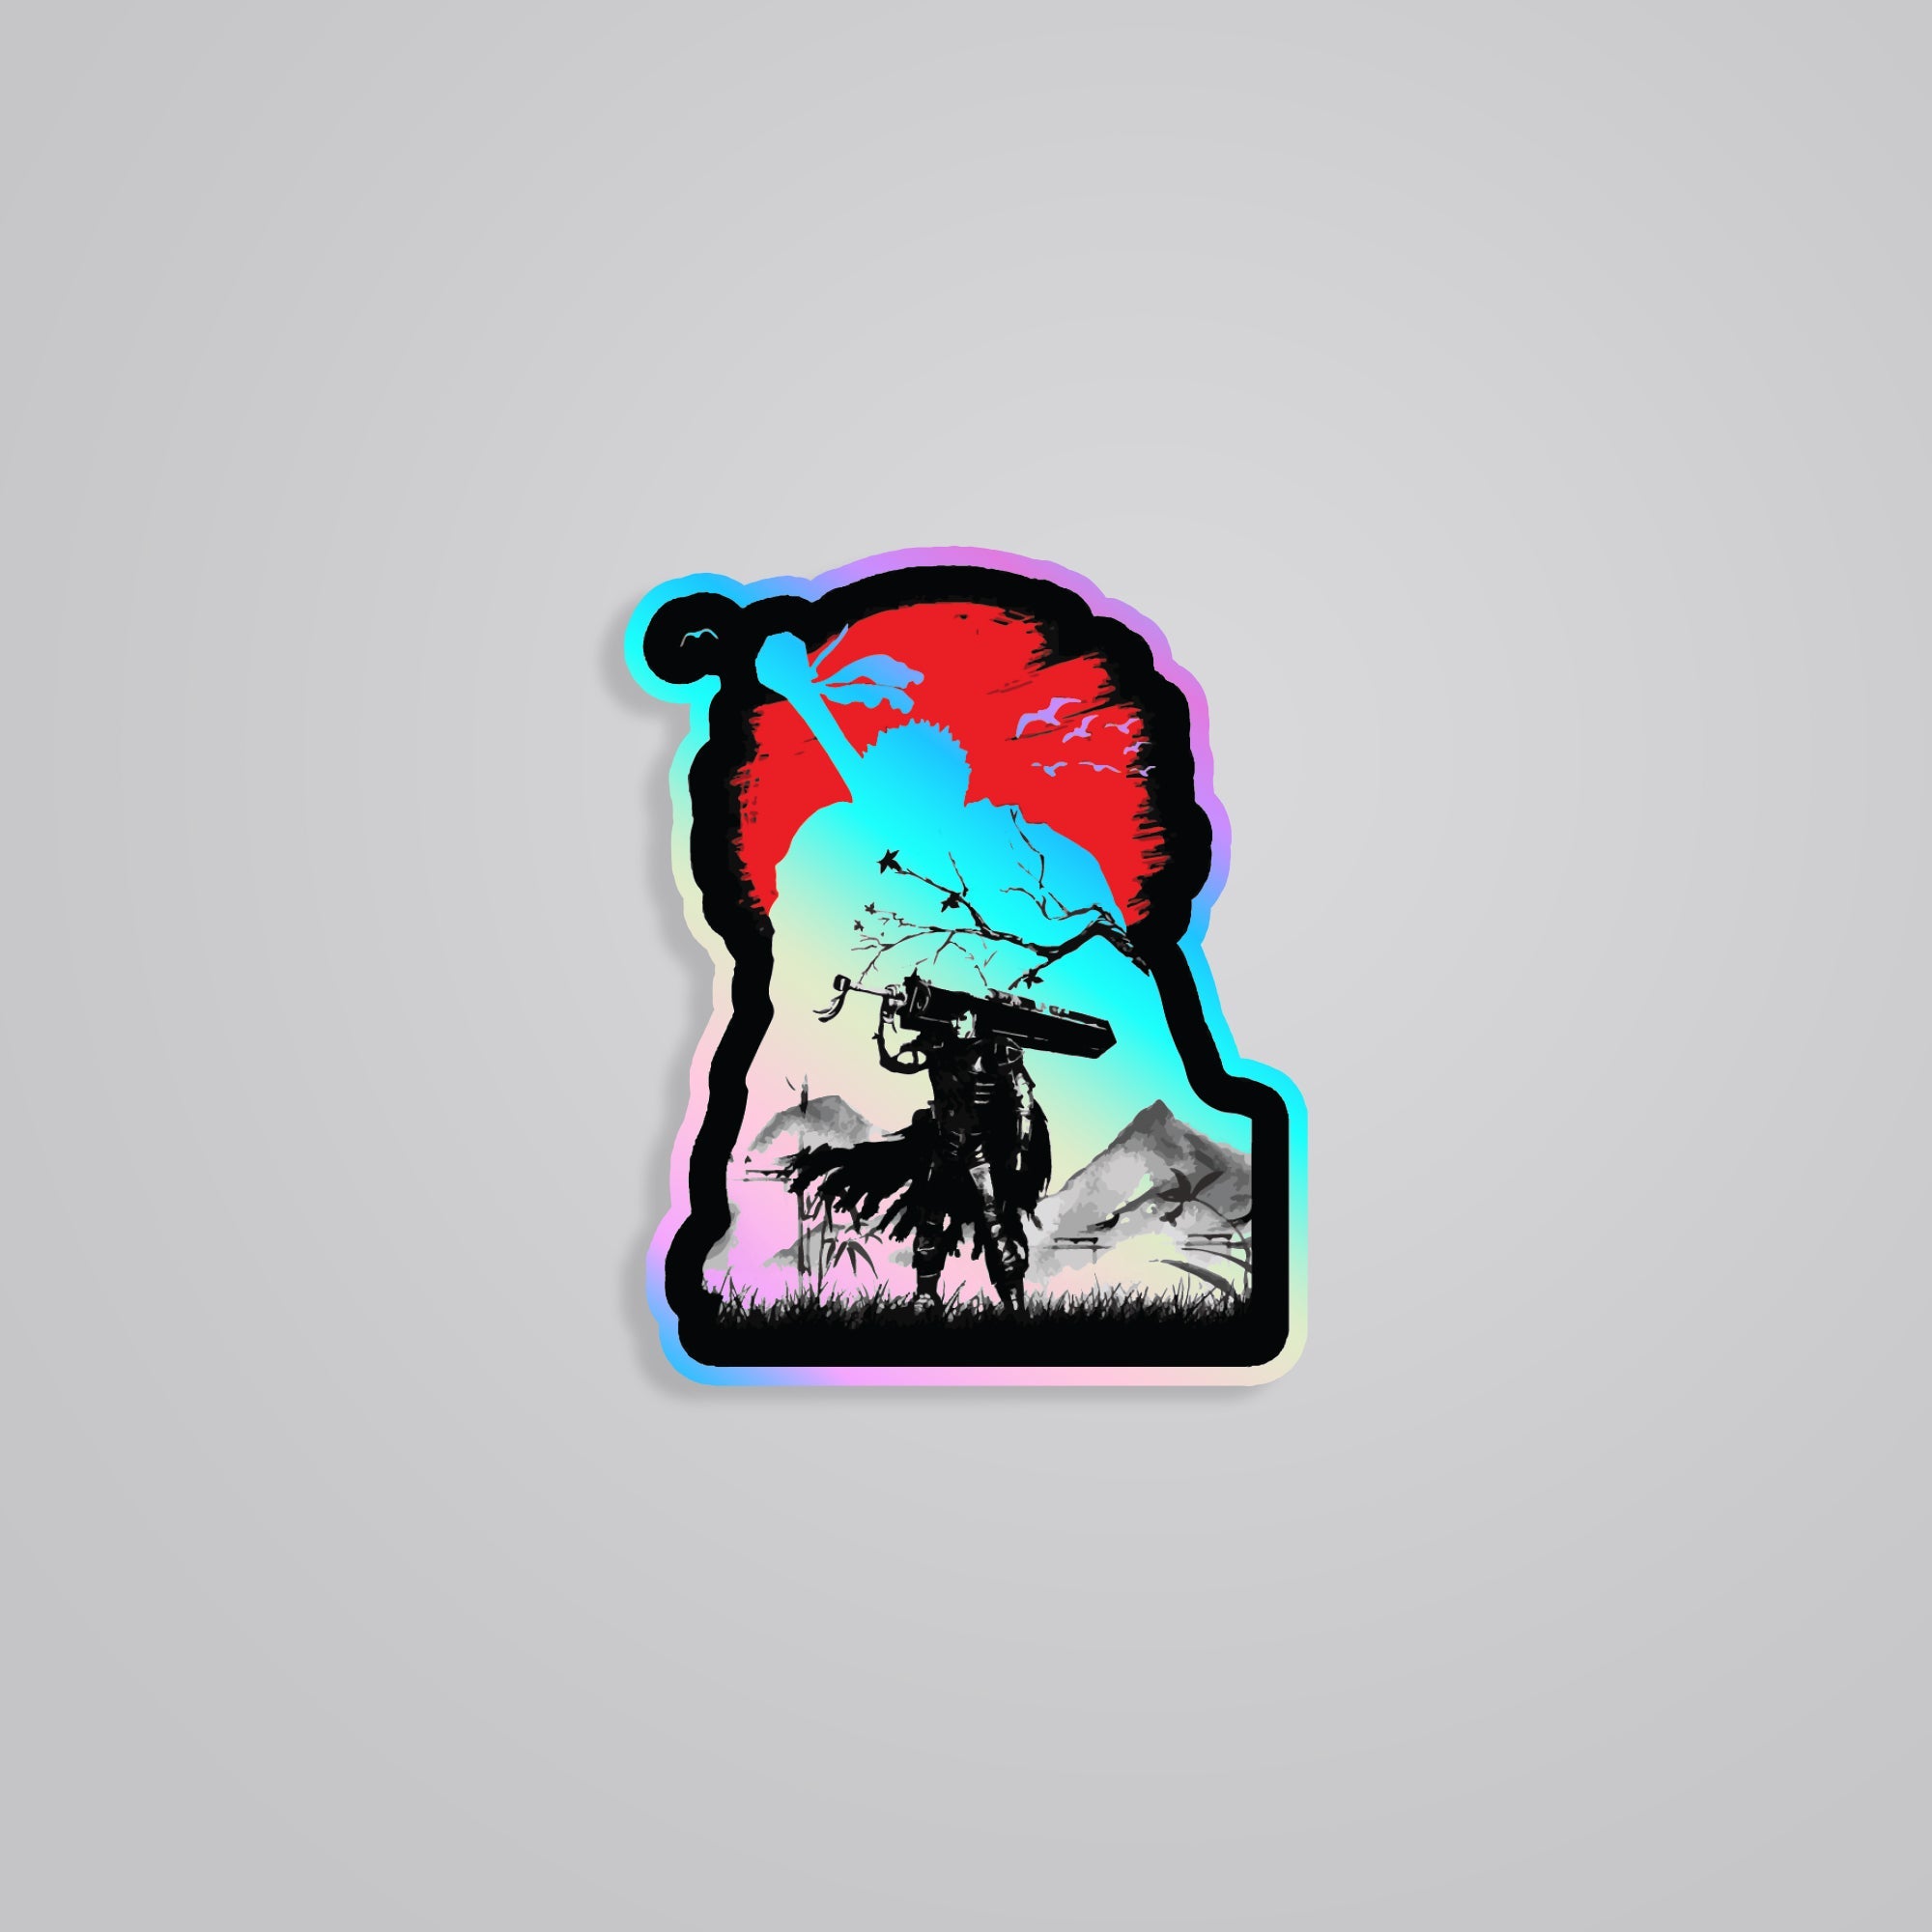 Fomo Store Holographic Stickers Anime Guts Silhouette